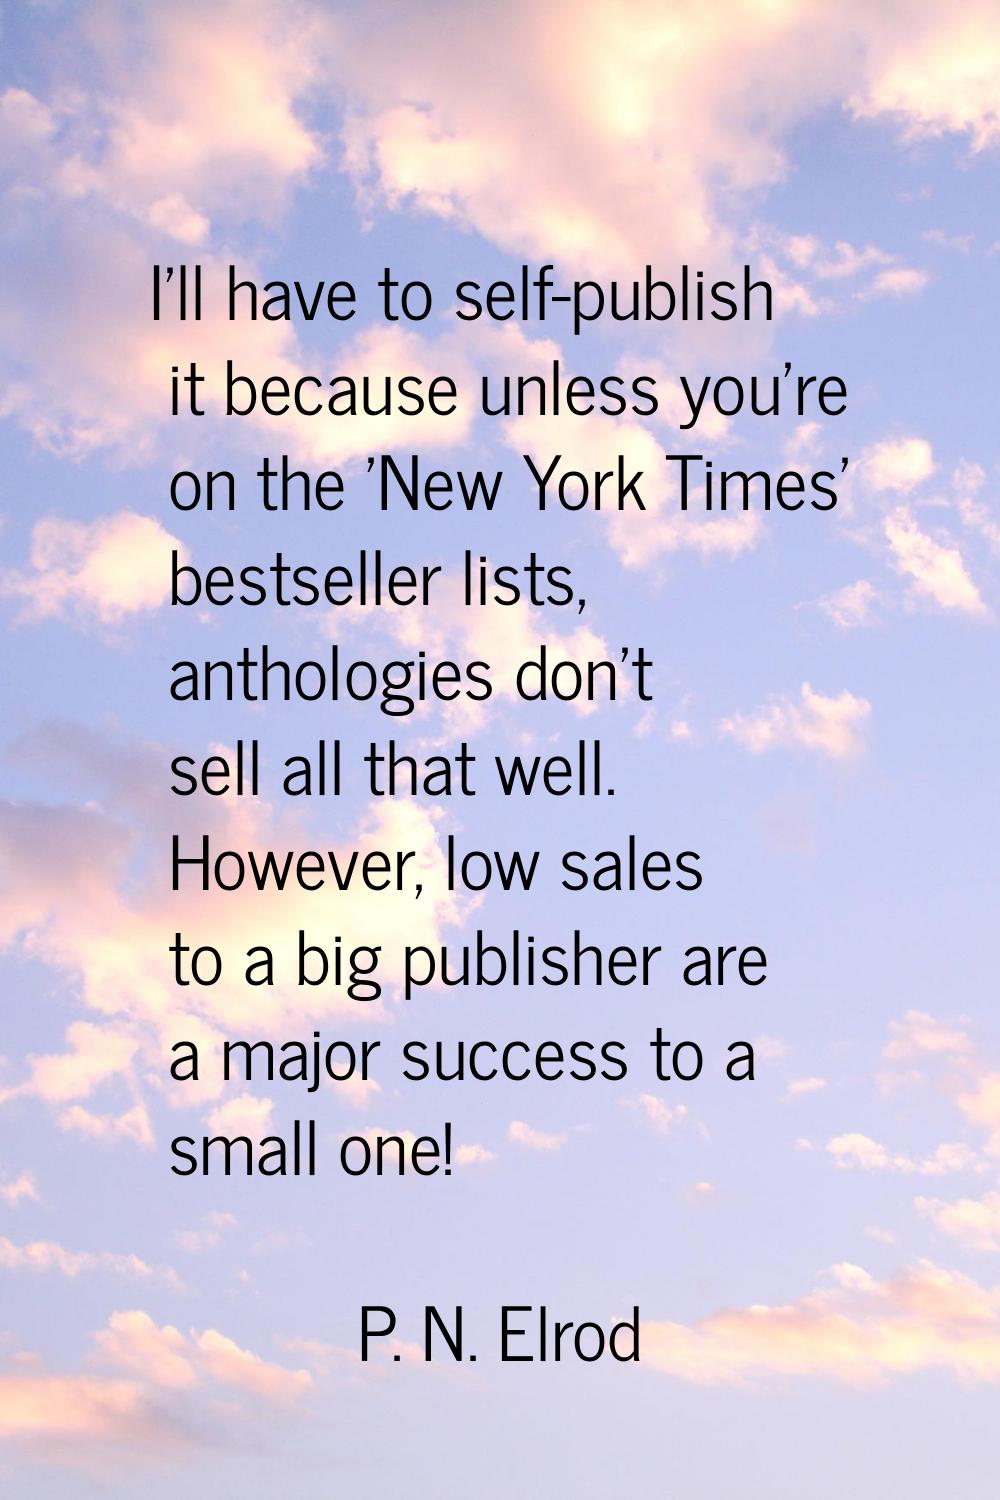 I'll have to self-publish it because unless you're on the 'New York Times' bestseller lists, anthol